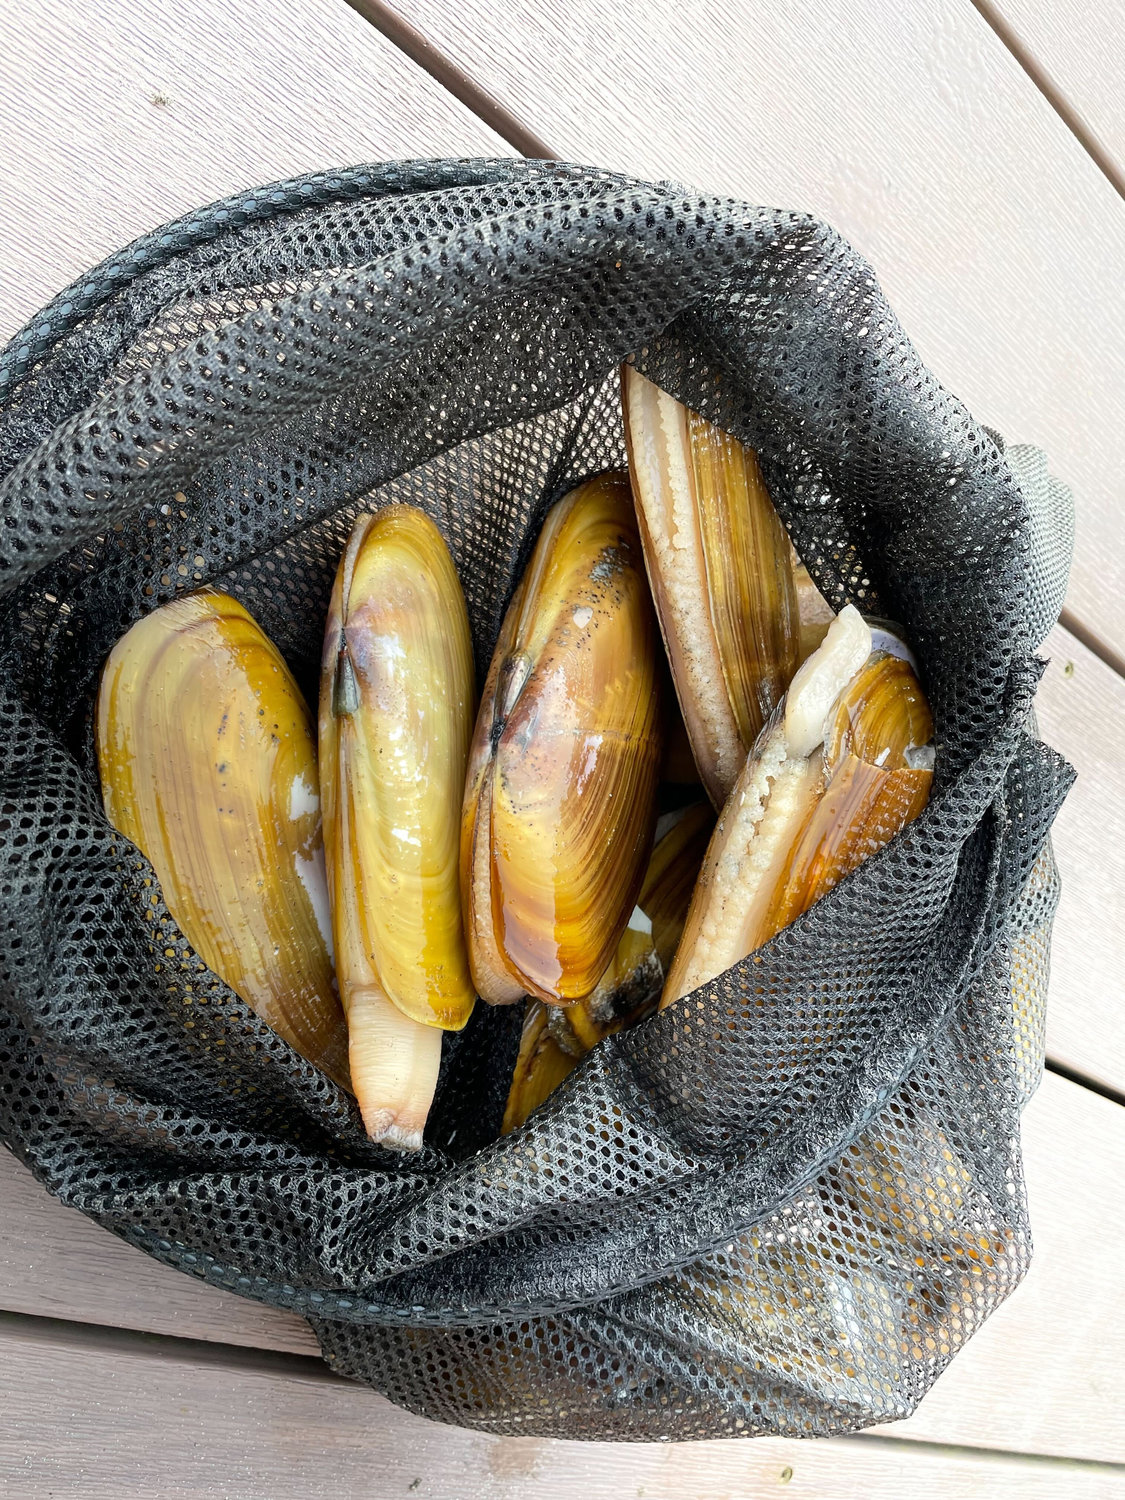 A bag with a limit of 15 razor clams dug at Mocrocks is pictured on March 18.